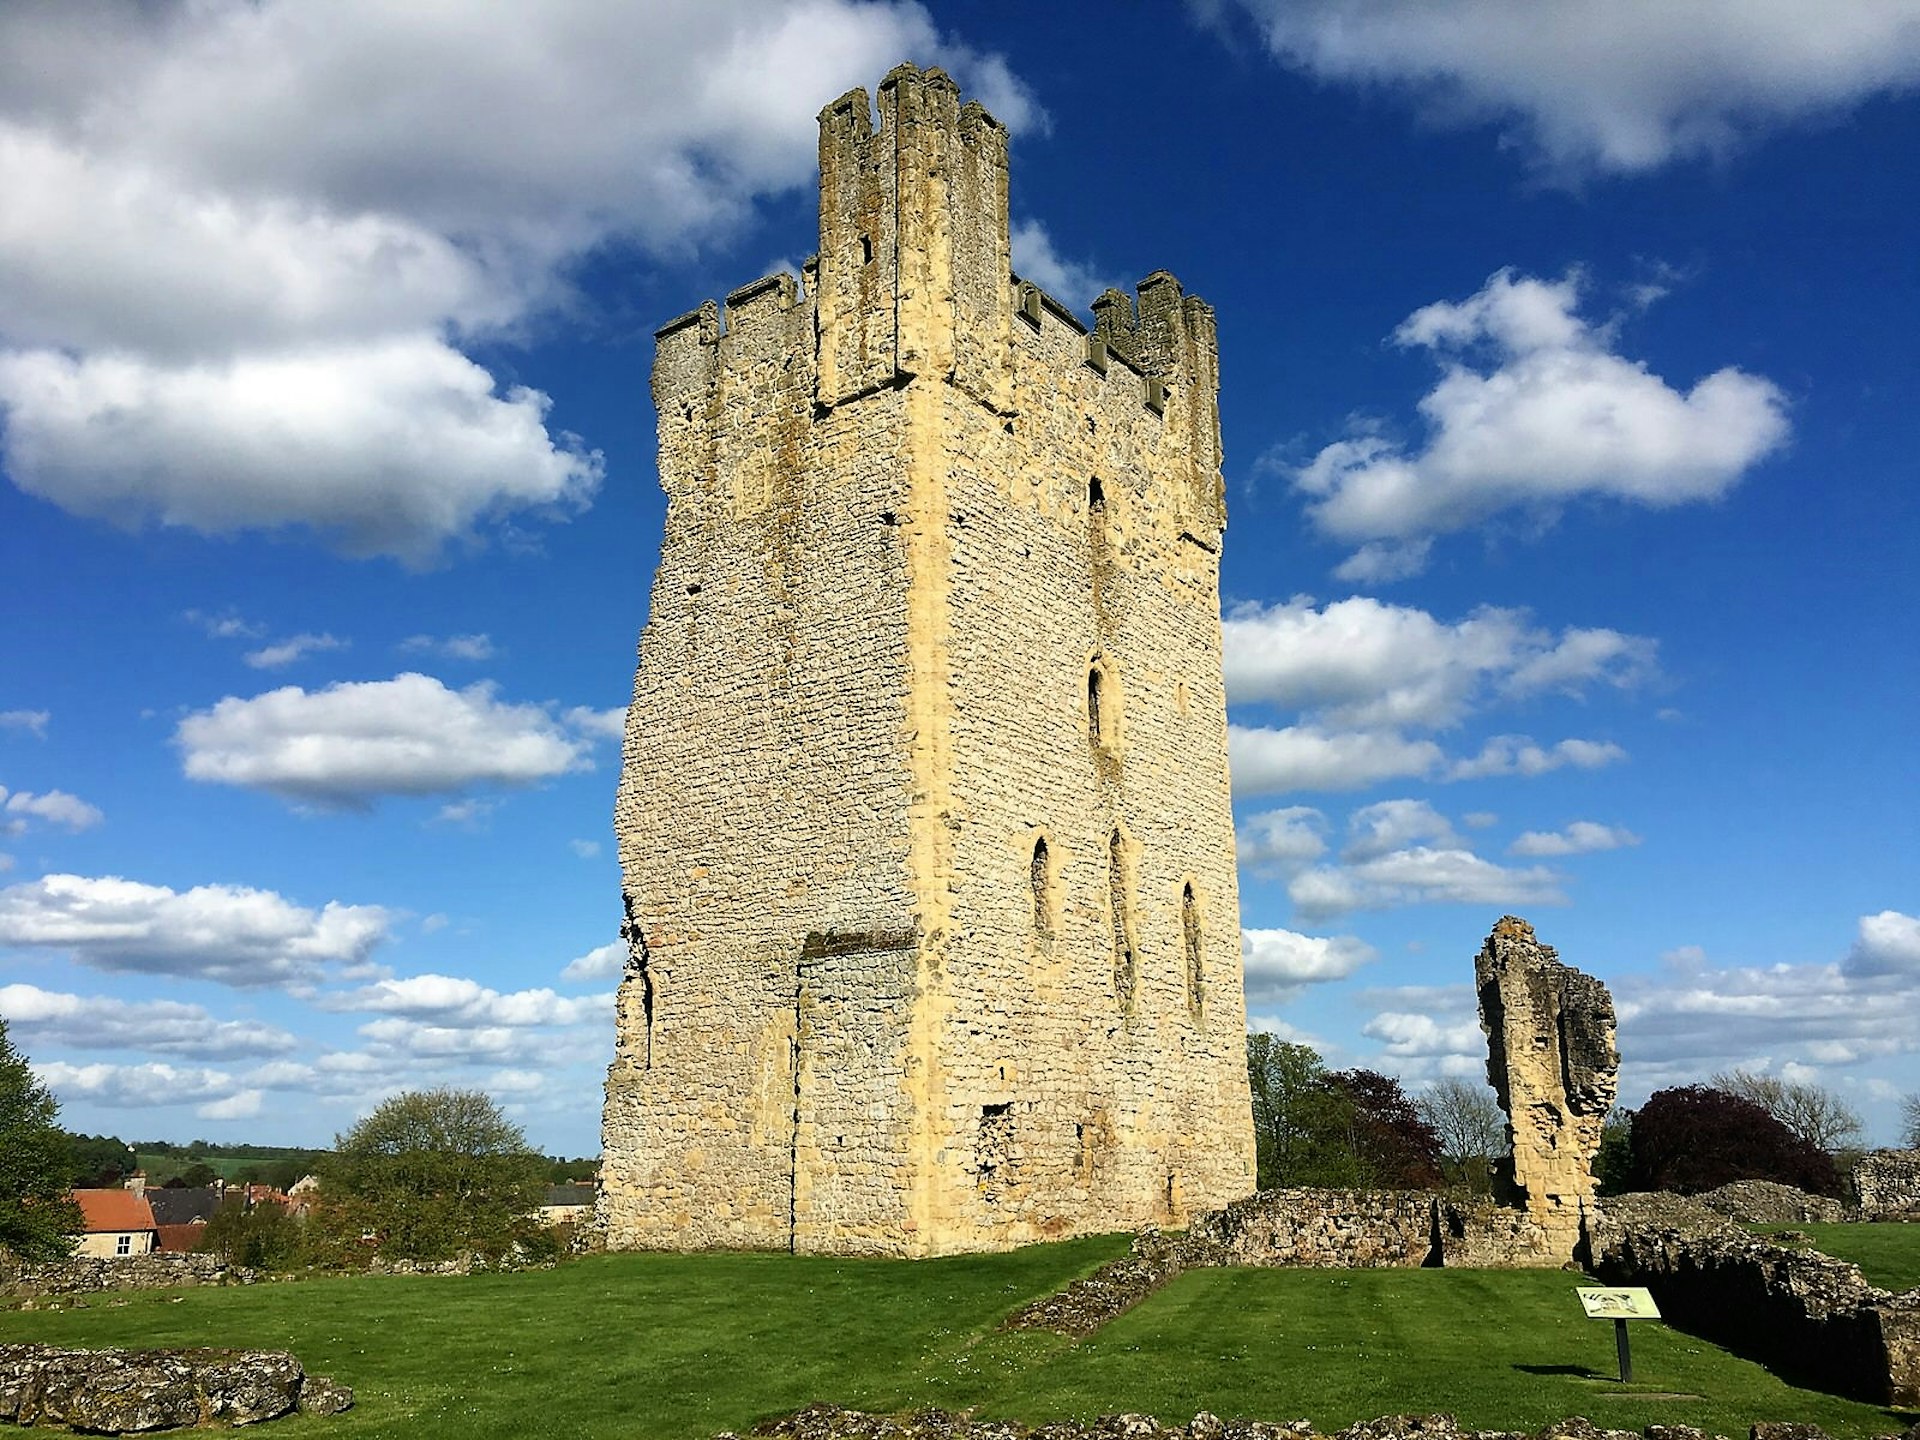 The sturdy keep of Helmsley Castle is an imposing local feature © Lorna Parkes / Lonely Planet